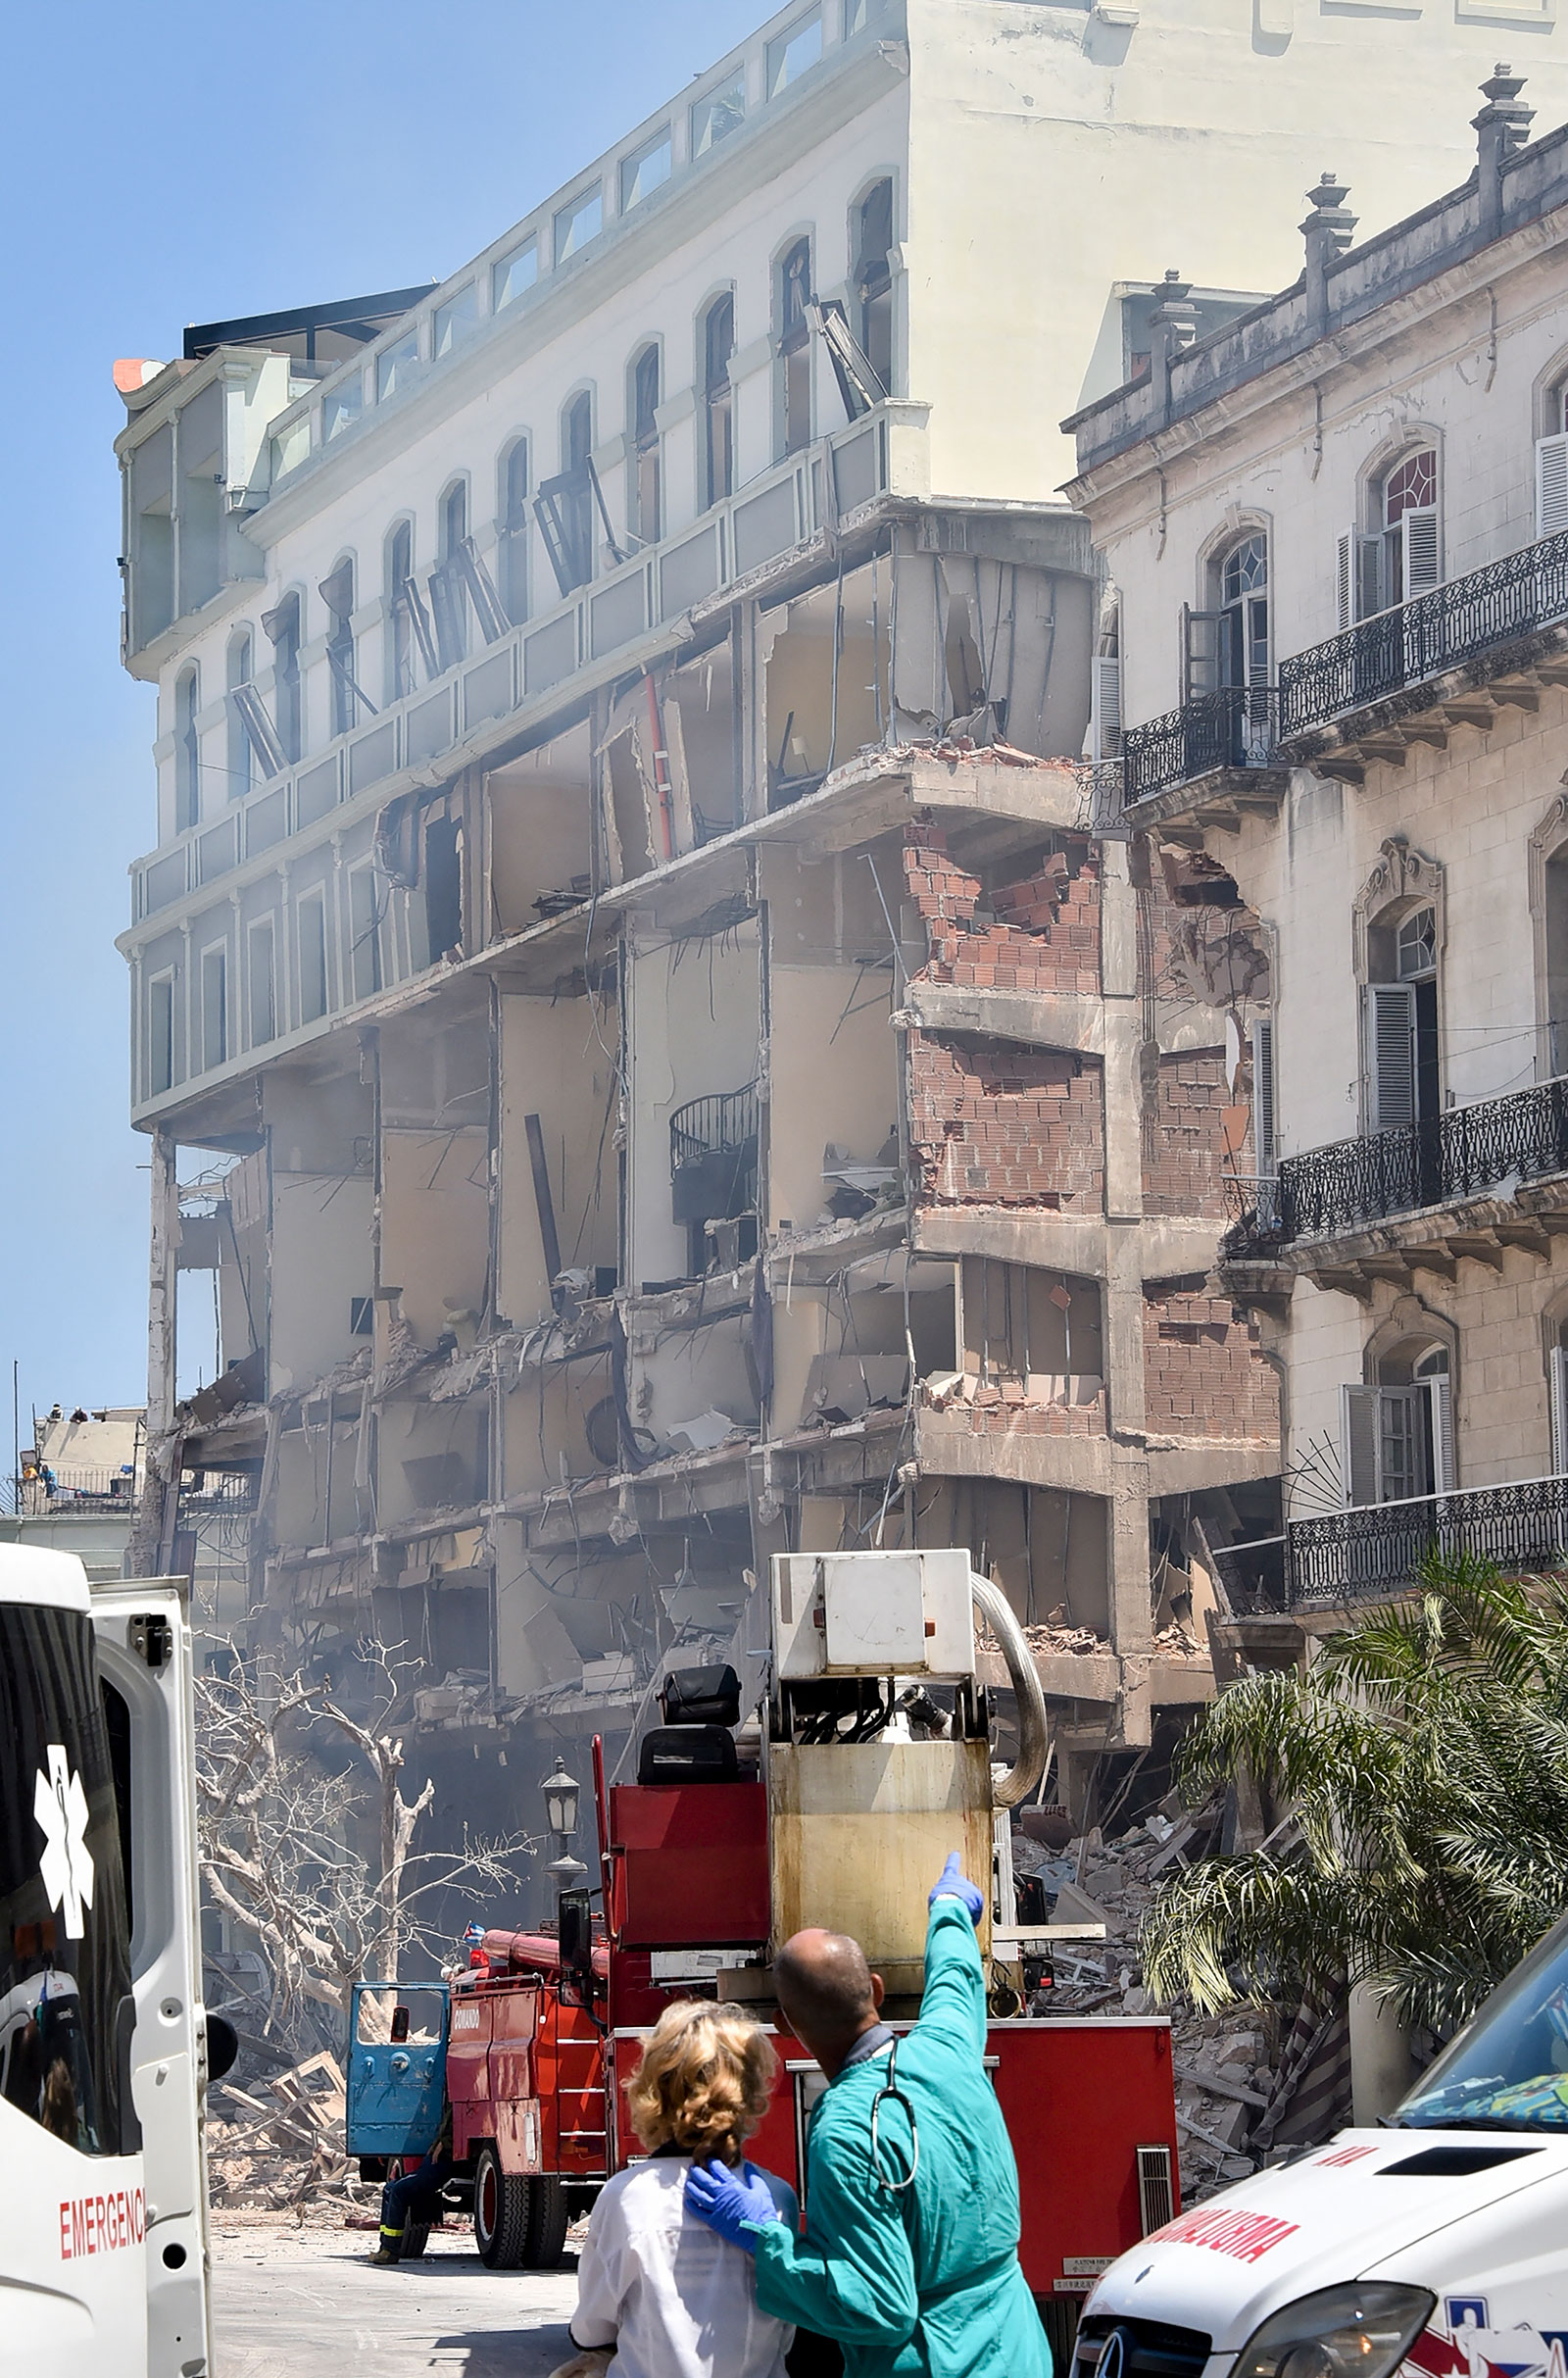 The Saratoga Hotel is seen after an explosion in Havana on May 6.